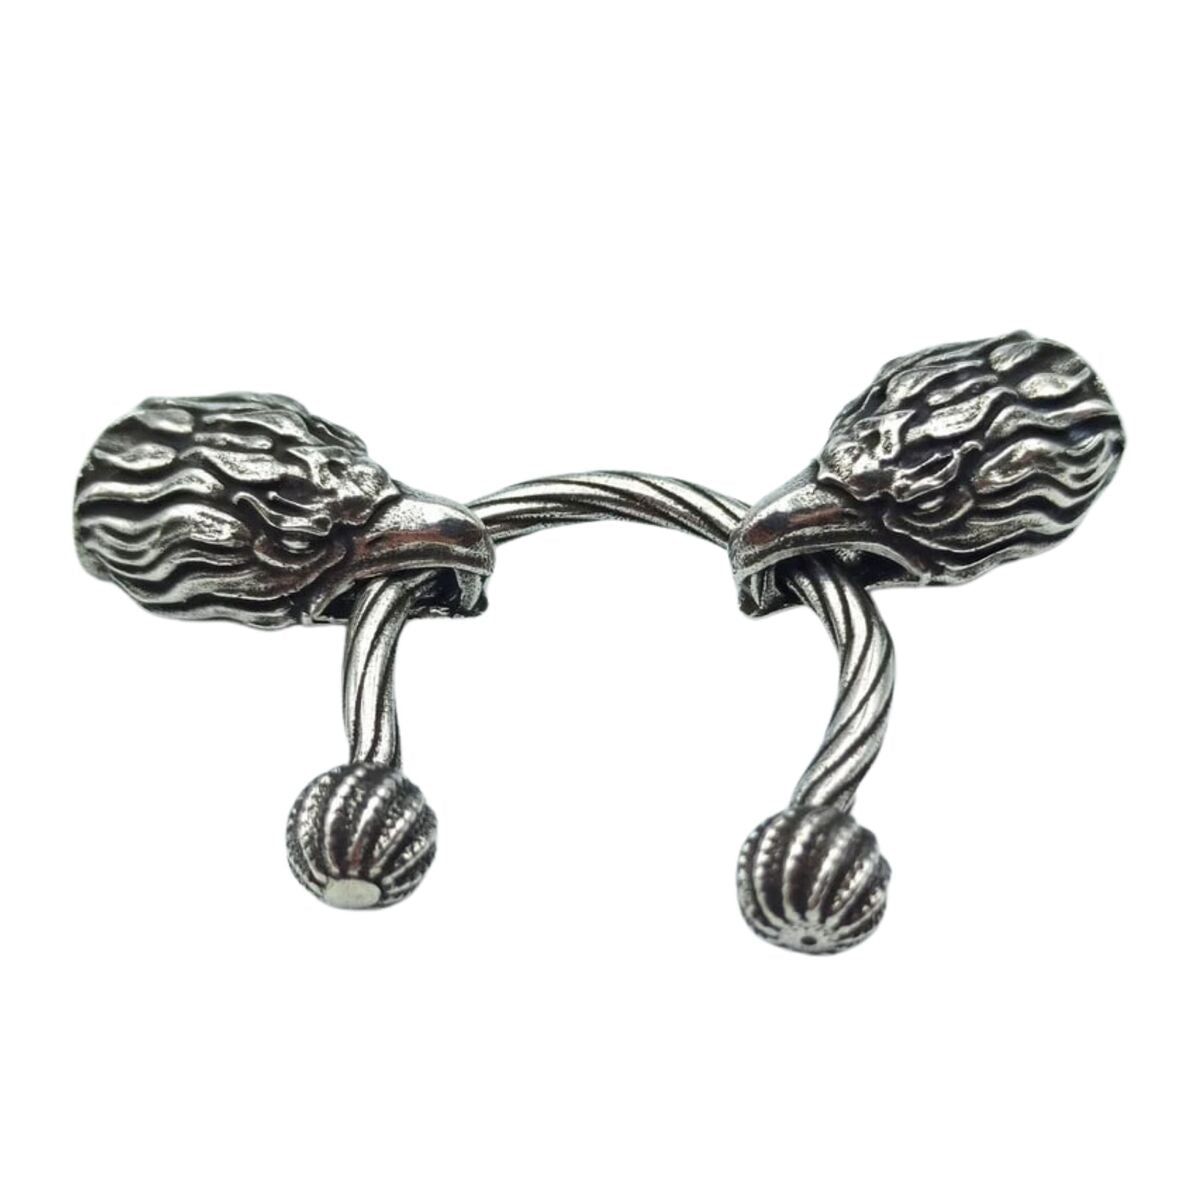 Great Eagle clasp for necklace from silver